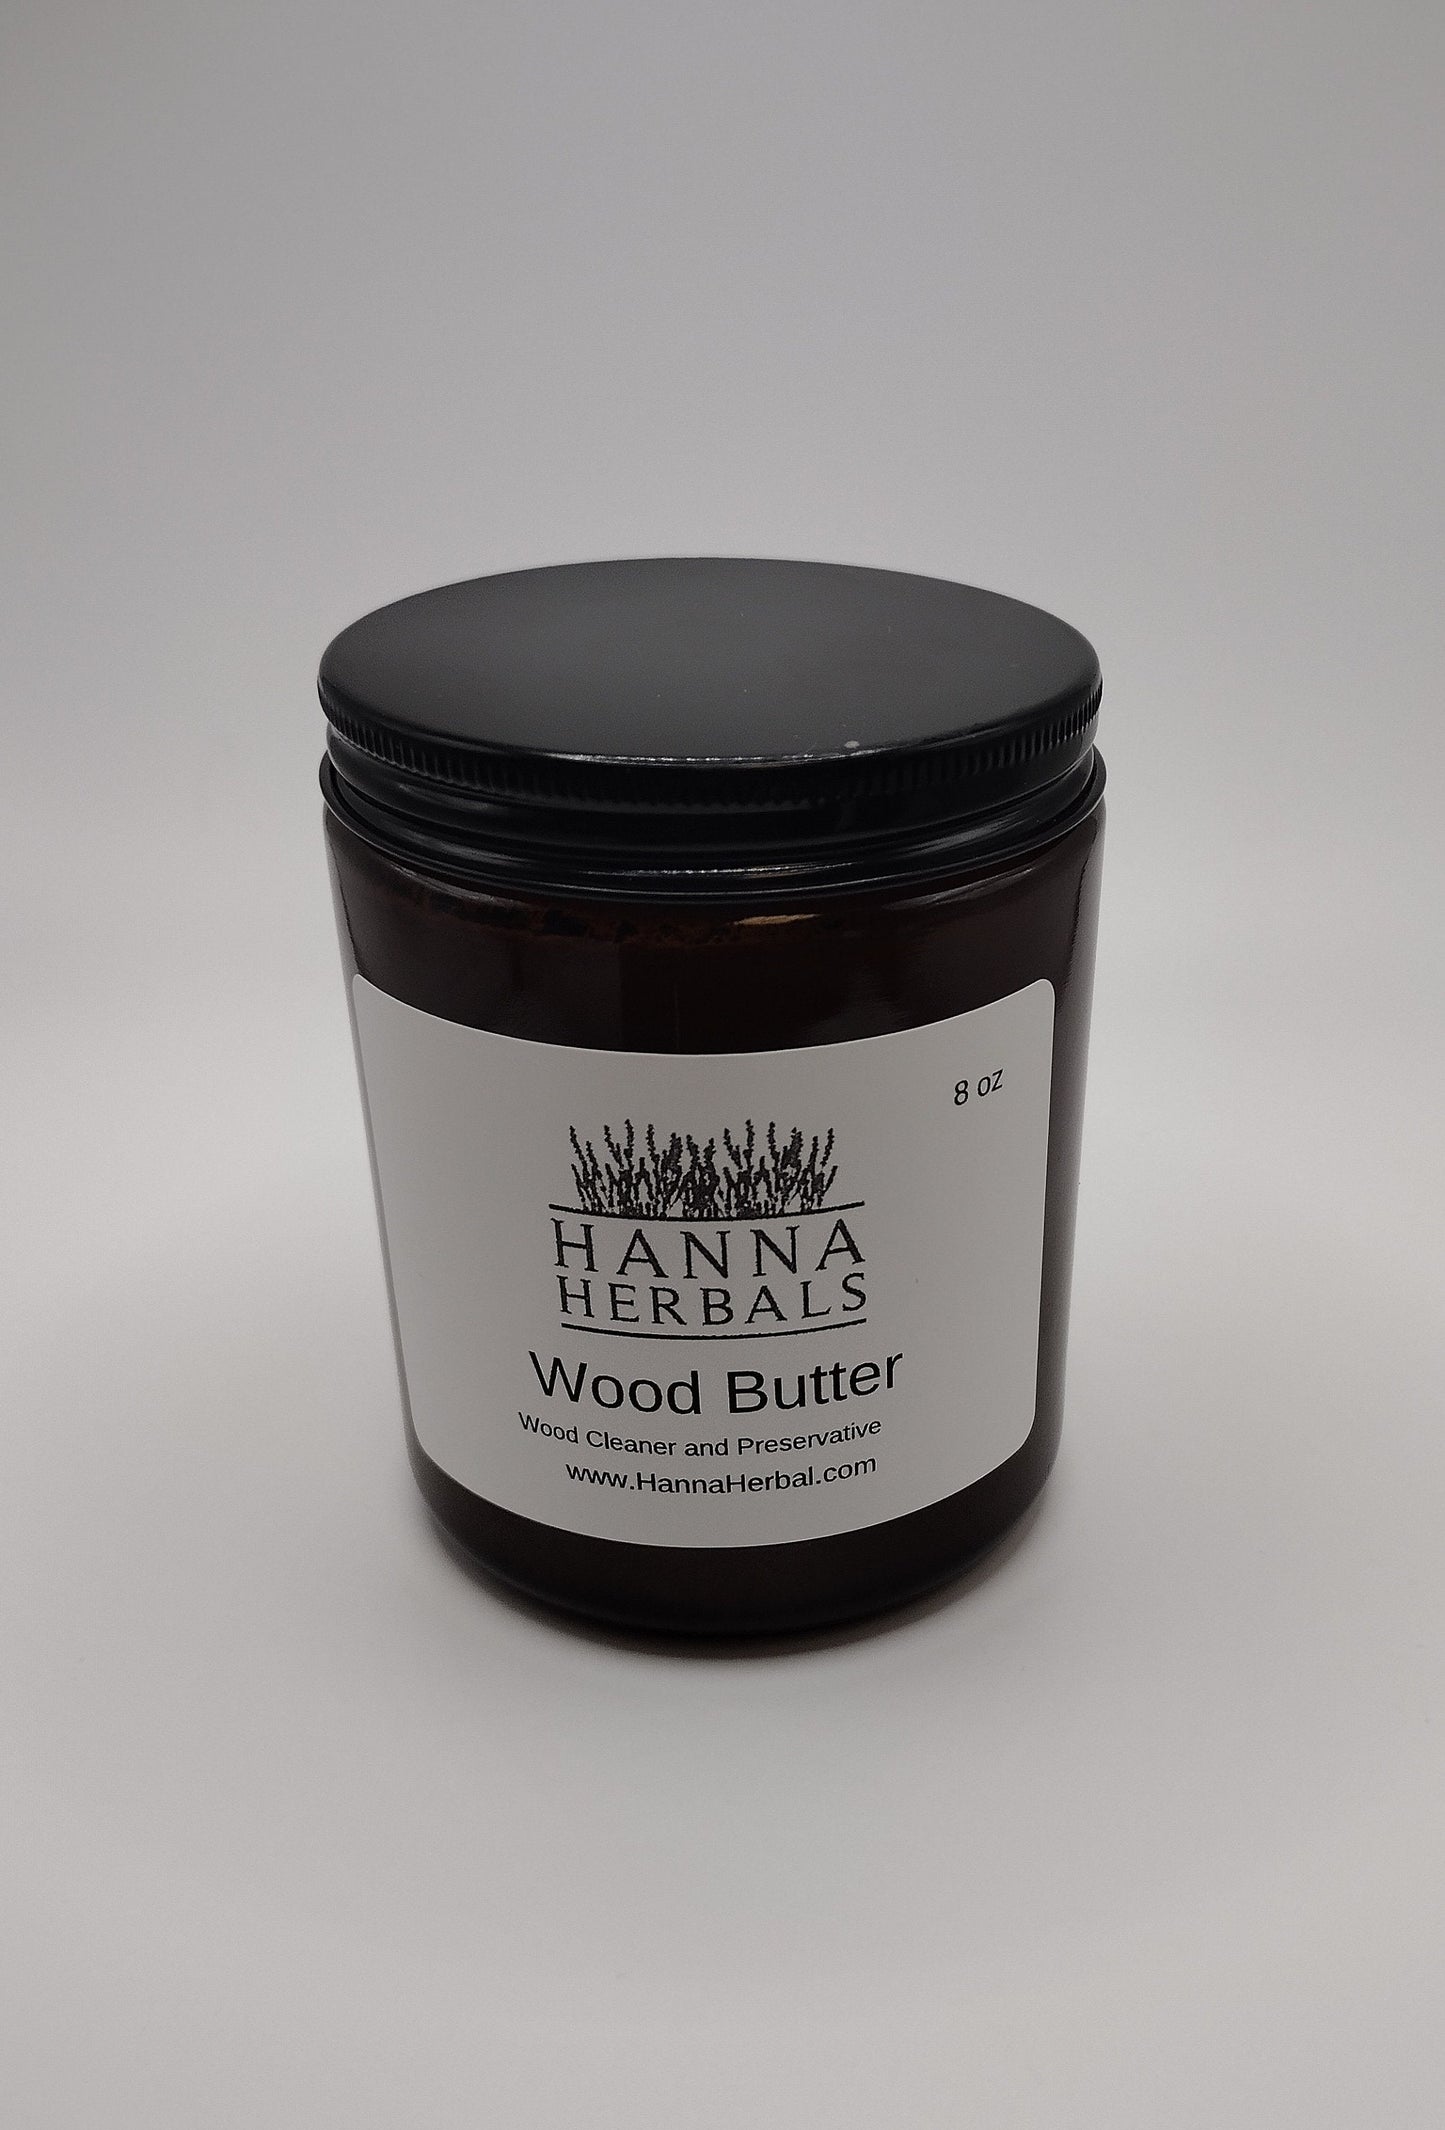 Wood Butter - wood conditioner - wood preservative - wood renew - wood moisturizer -